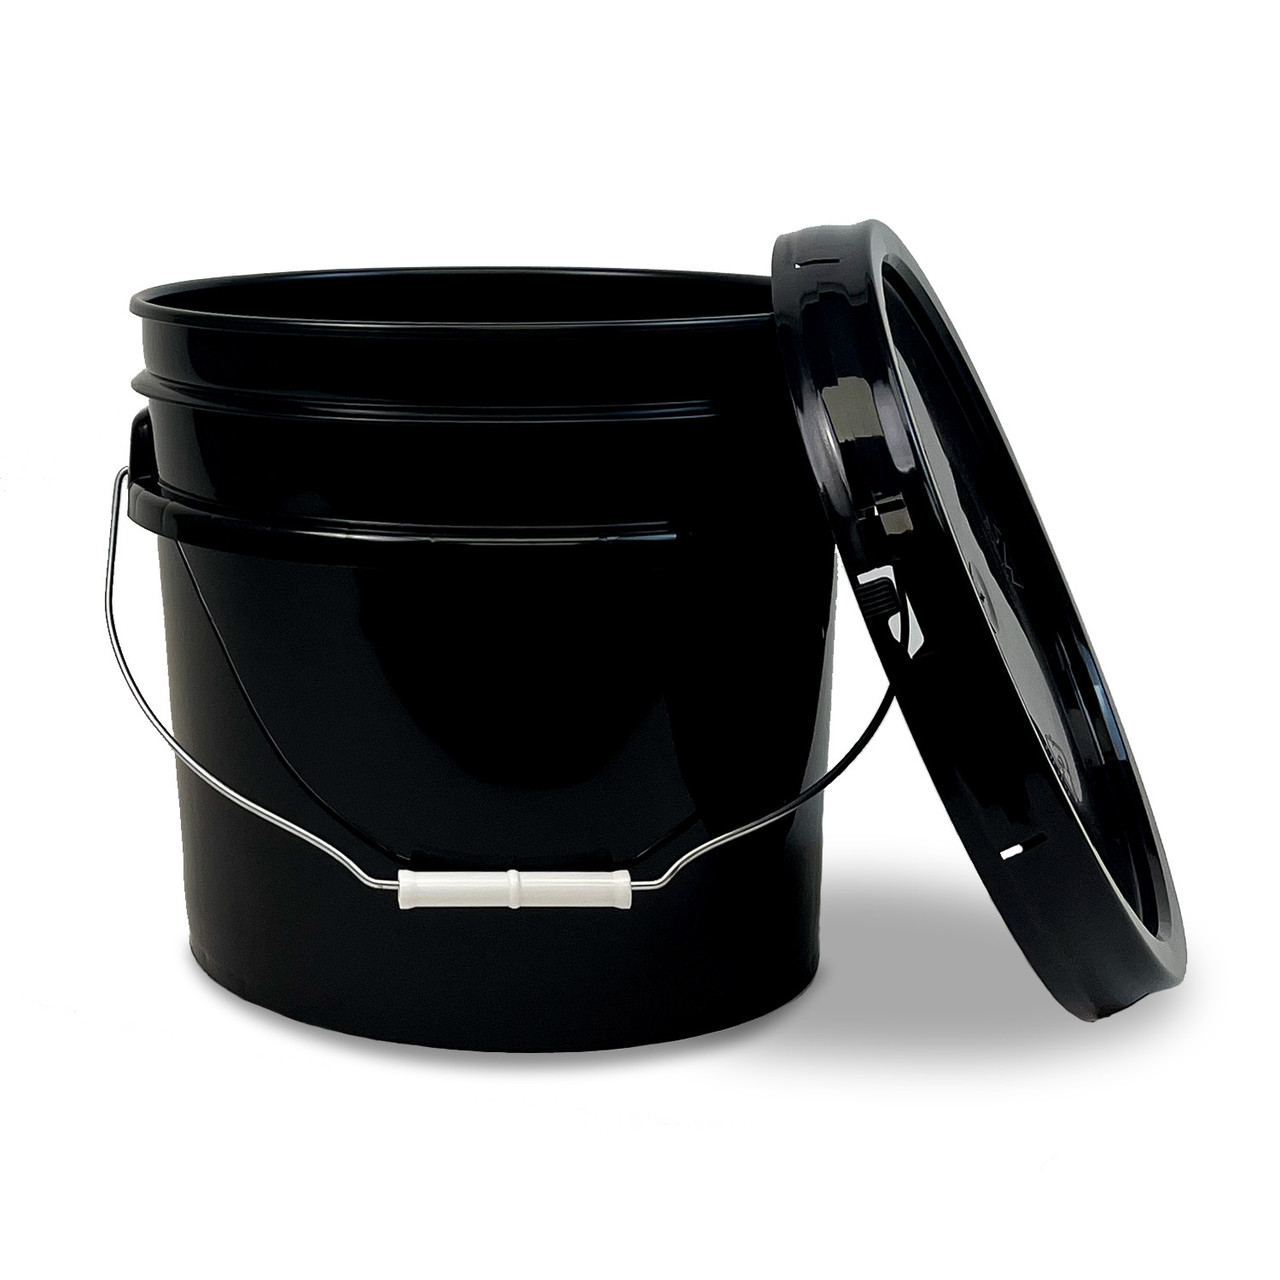 5 Gallon Bucket with Easy On/Off Ratcheting Lid - 1 Bucket - HDPE, Food Grade, BPA Free - Gardening & Composting Info - All Purpose Pail